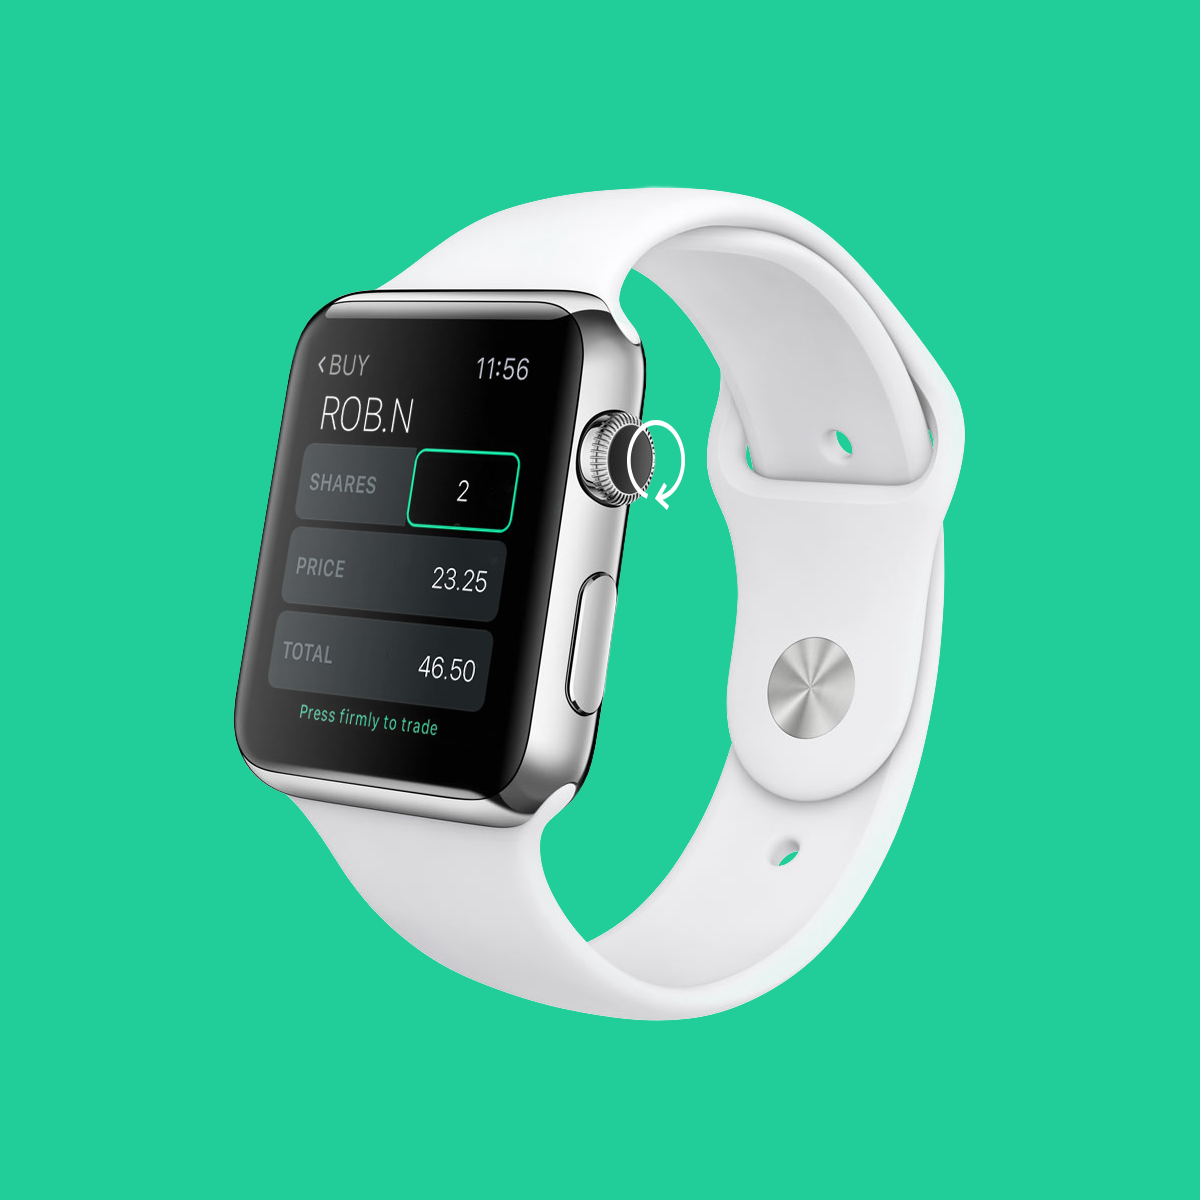 How to Use Robinhood on Your Apple Watch? 1